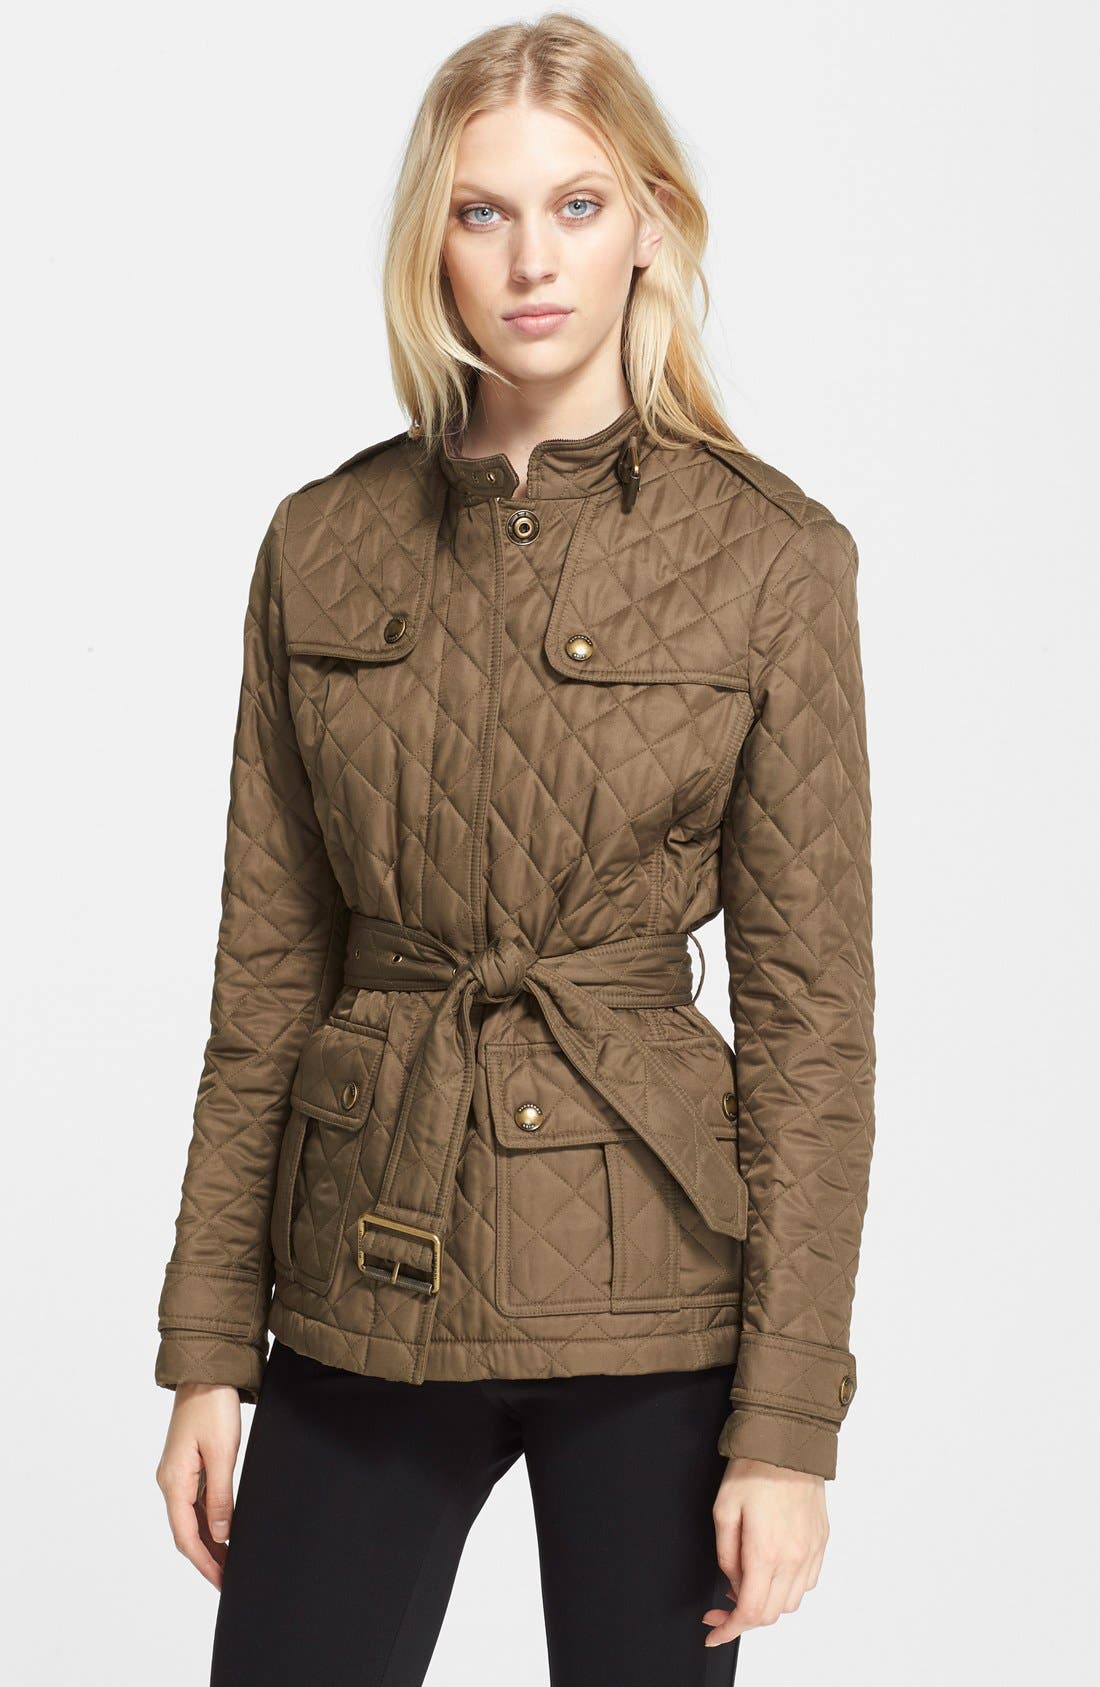 burberry quilted jacket nordstrom